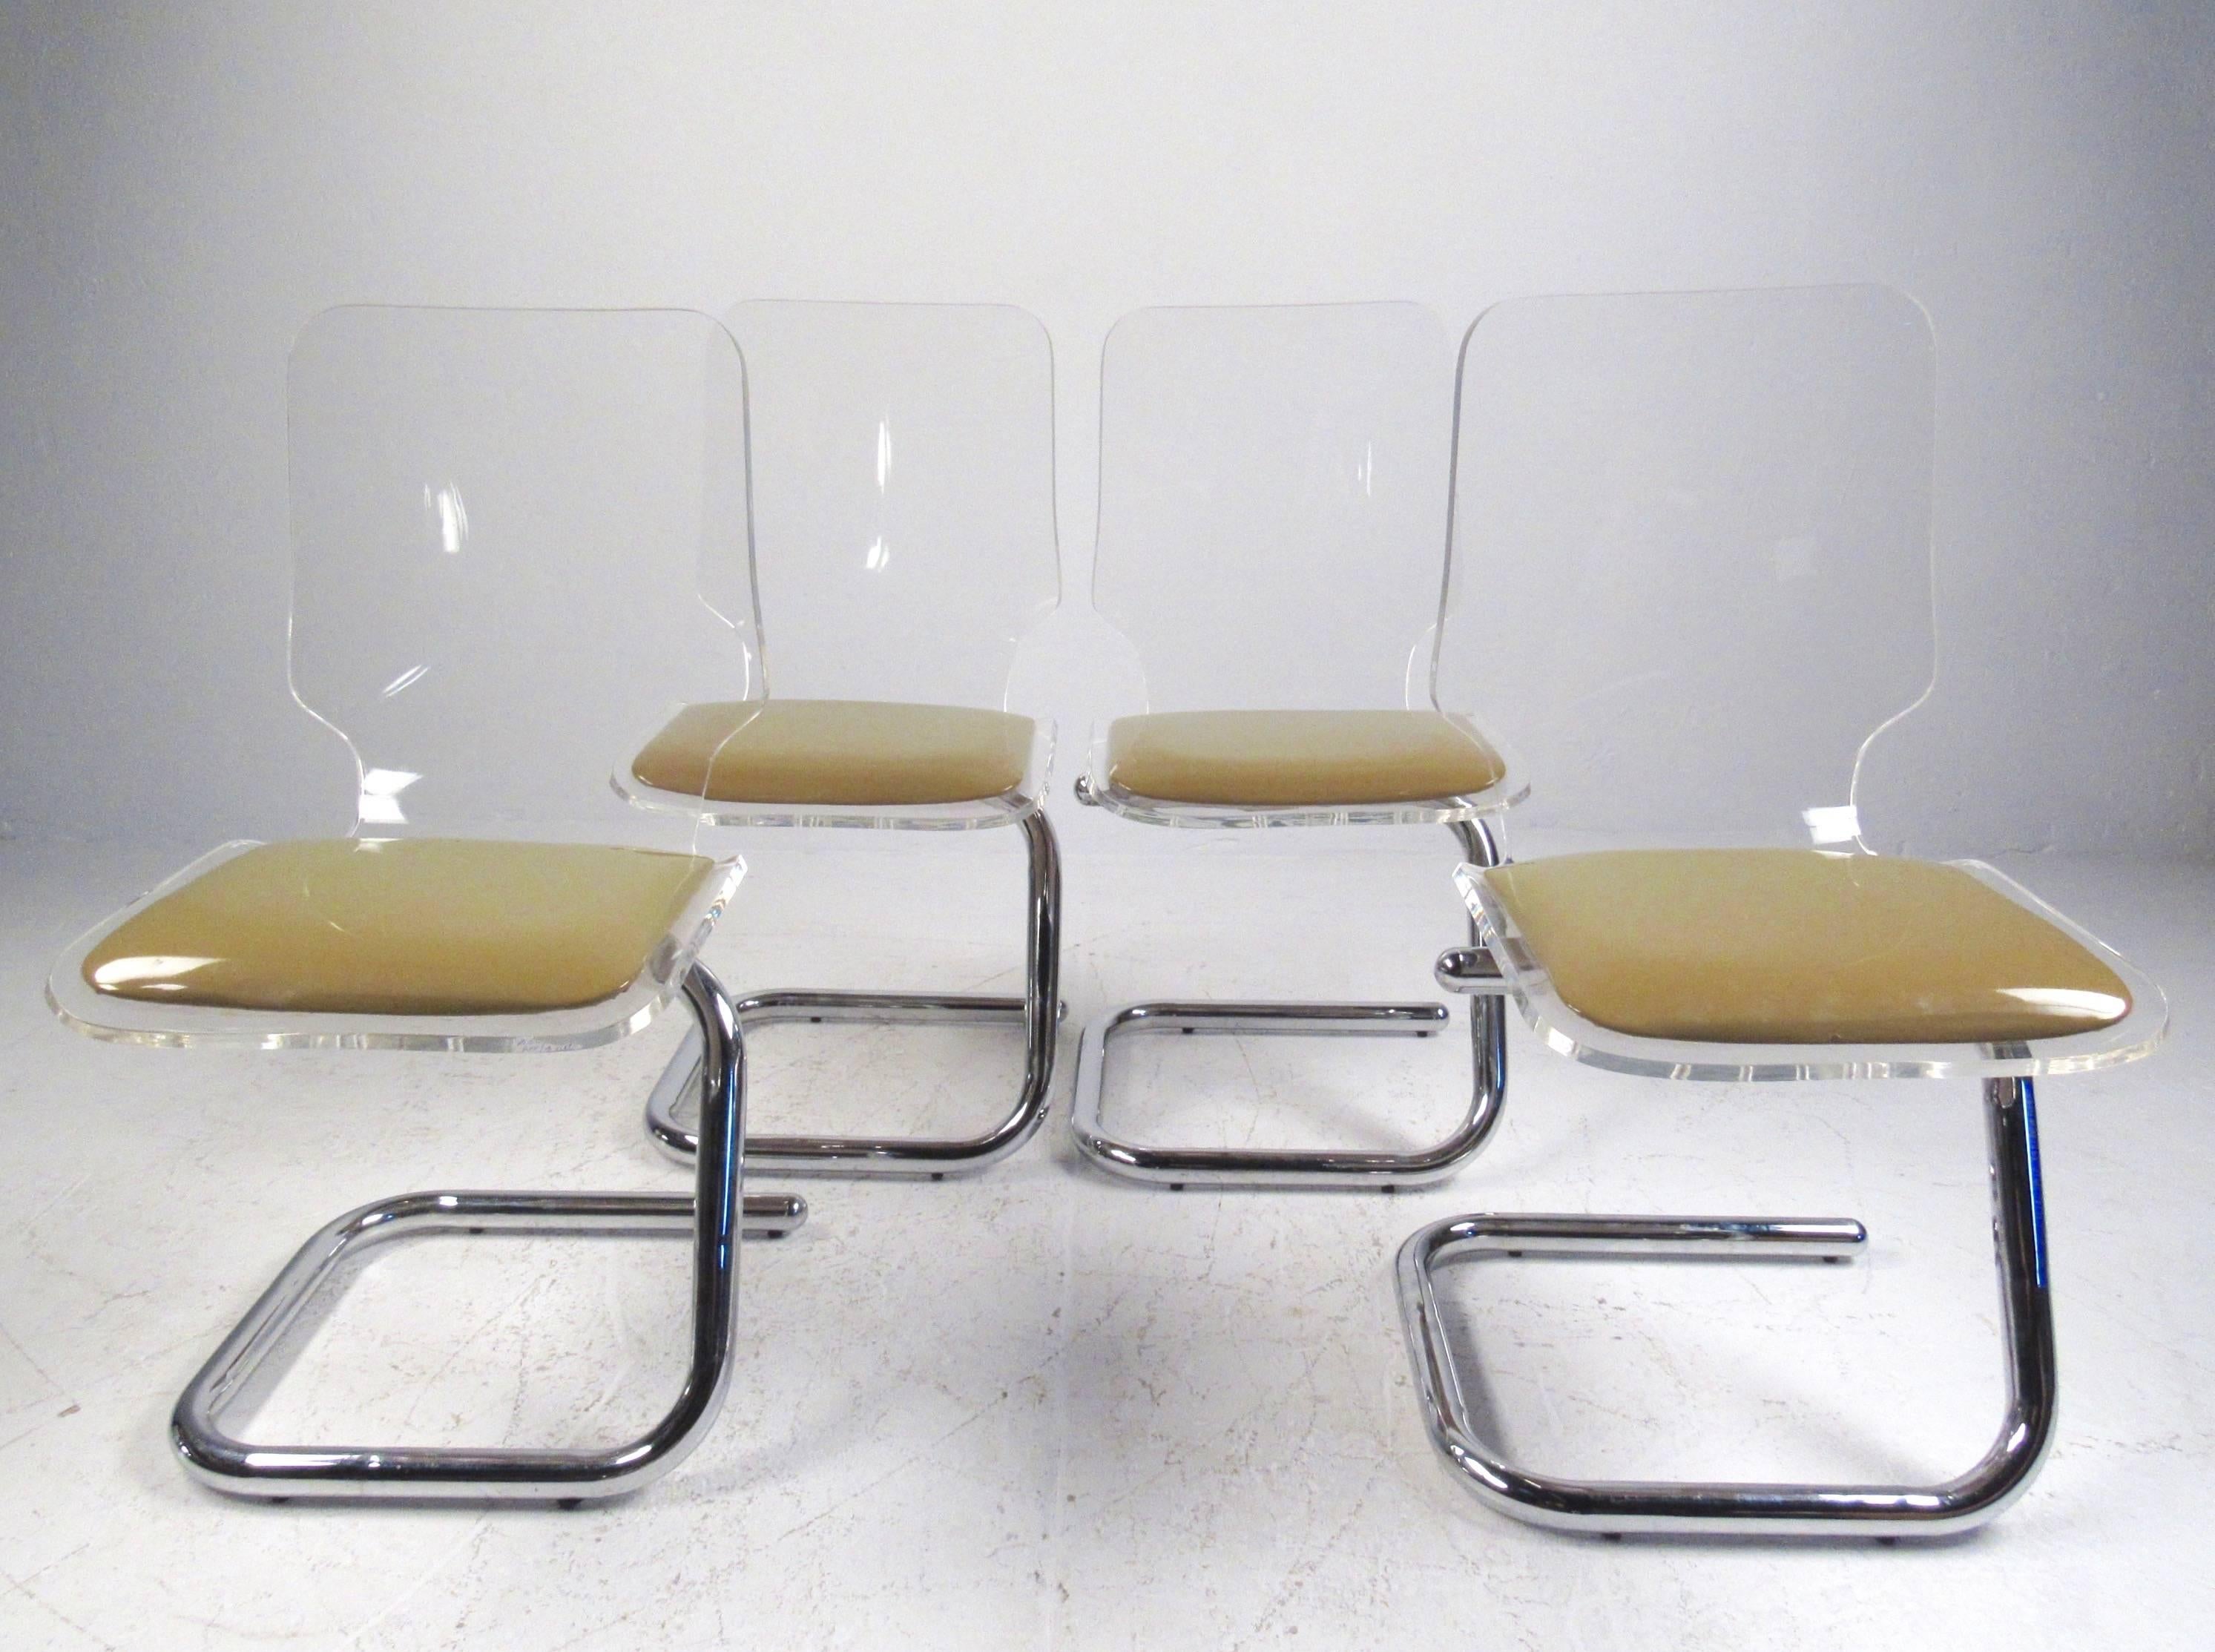 This impressive set of four Mid-Century Modern Lucite and chrome dining chairs features stylish cantilever design with sculpted backs and padded seats. Comfortable and stylish set of chairs by Luigi Bardini for Miniforms and Hill Manufacturing.